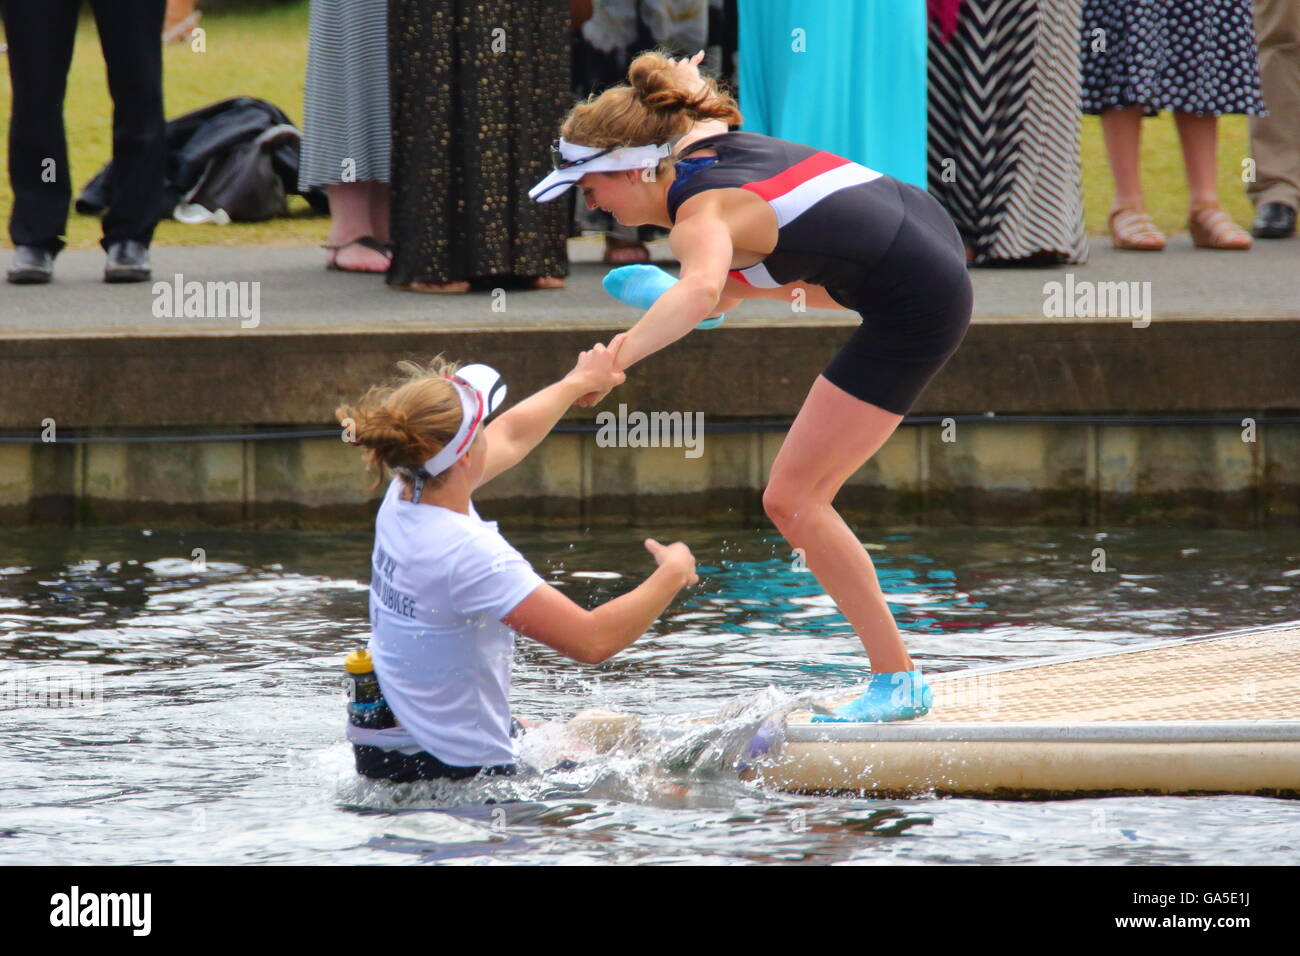 Rowers from all over the world came to the annual Henley Royal Regatta 2016. Gloucester Rowing Club celebrates their victory in the first race of the day. Stock Photo